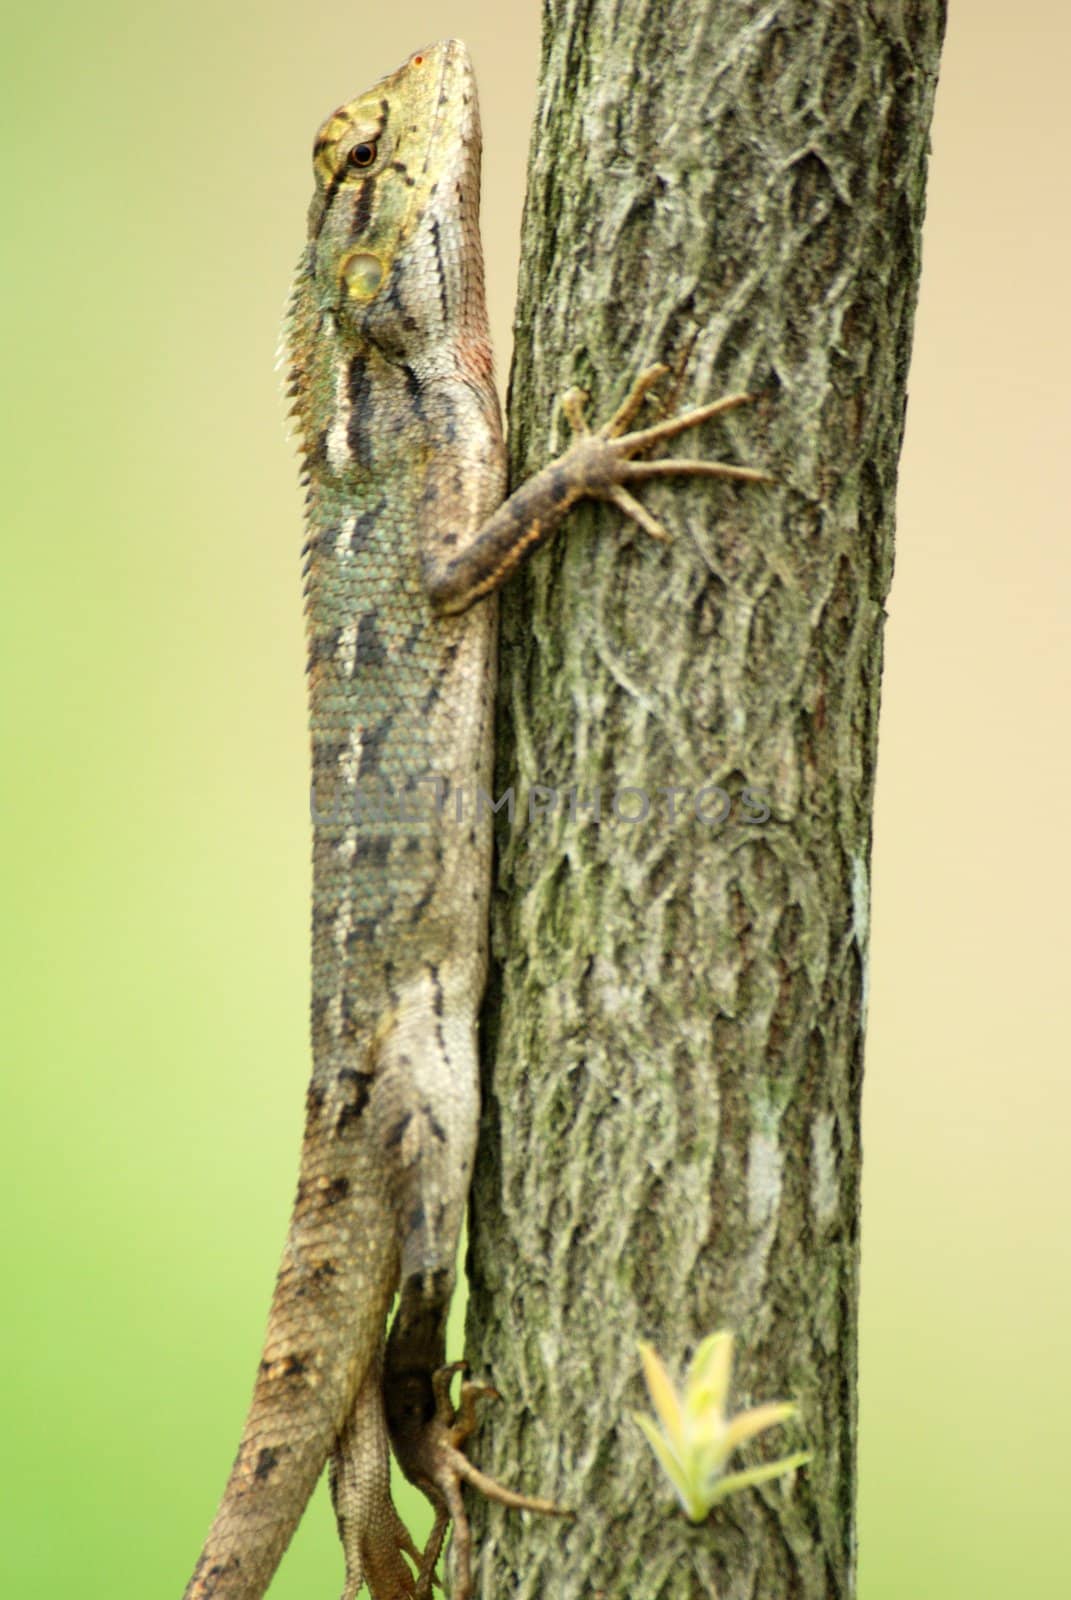 Changeable lizard (calotes versicolor lizard) in tree and found in singapore chinese garden.